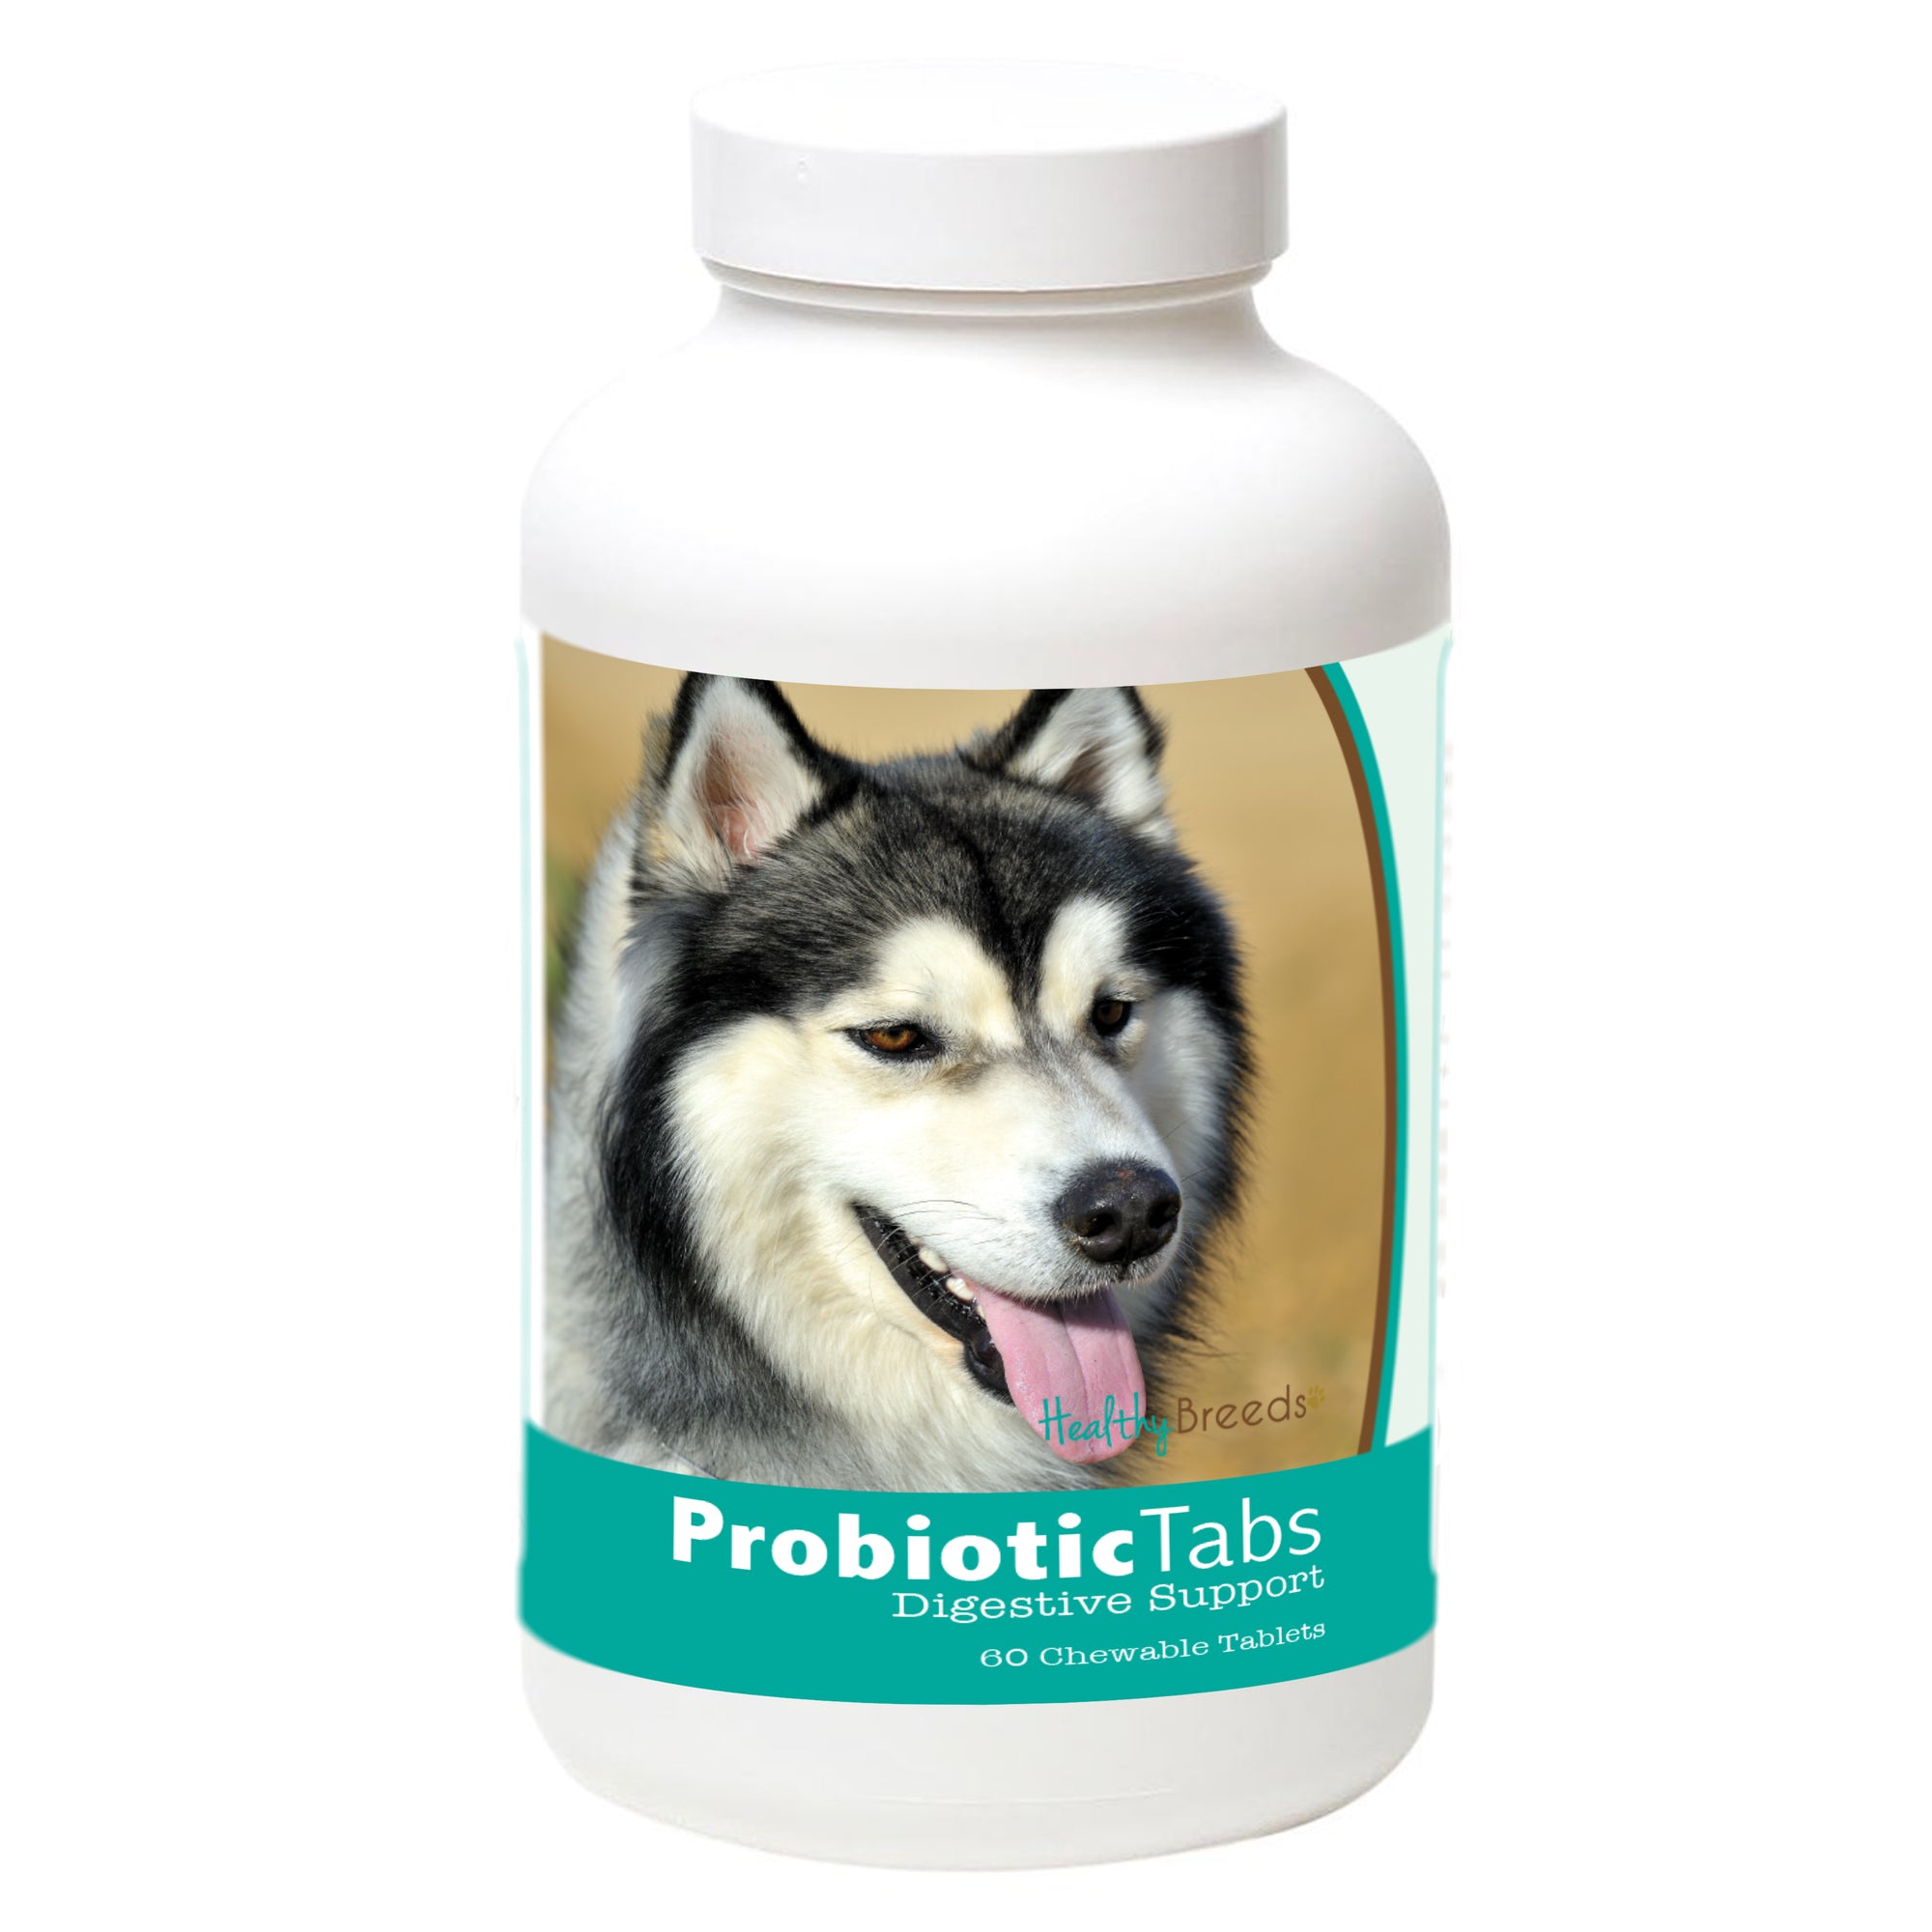 Healthy Breeds Siberian Husky Probiotic and Digestive Support for Dogs 60 Count